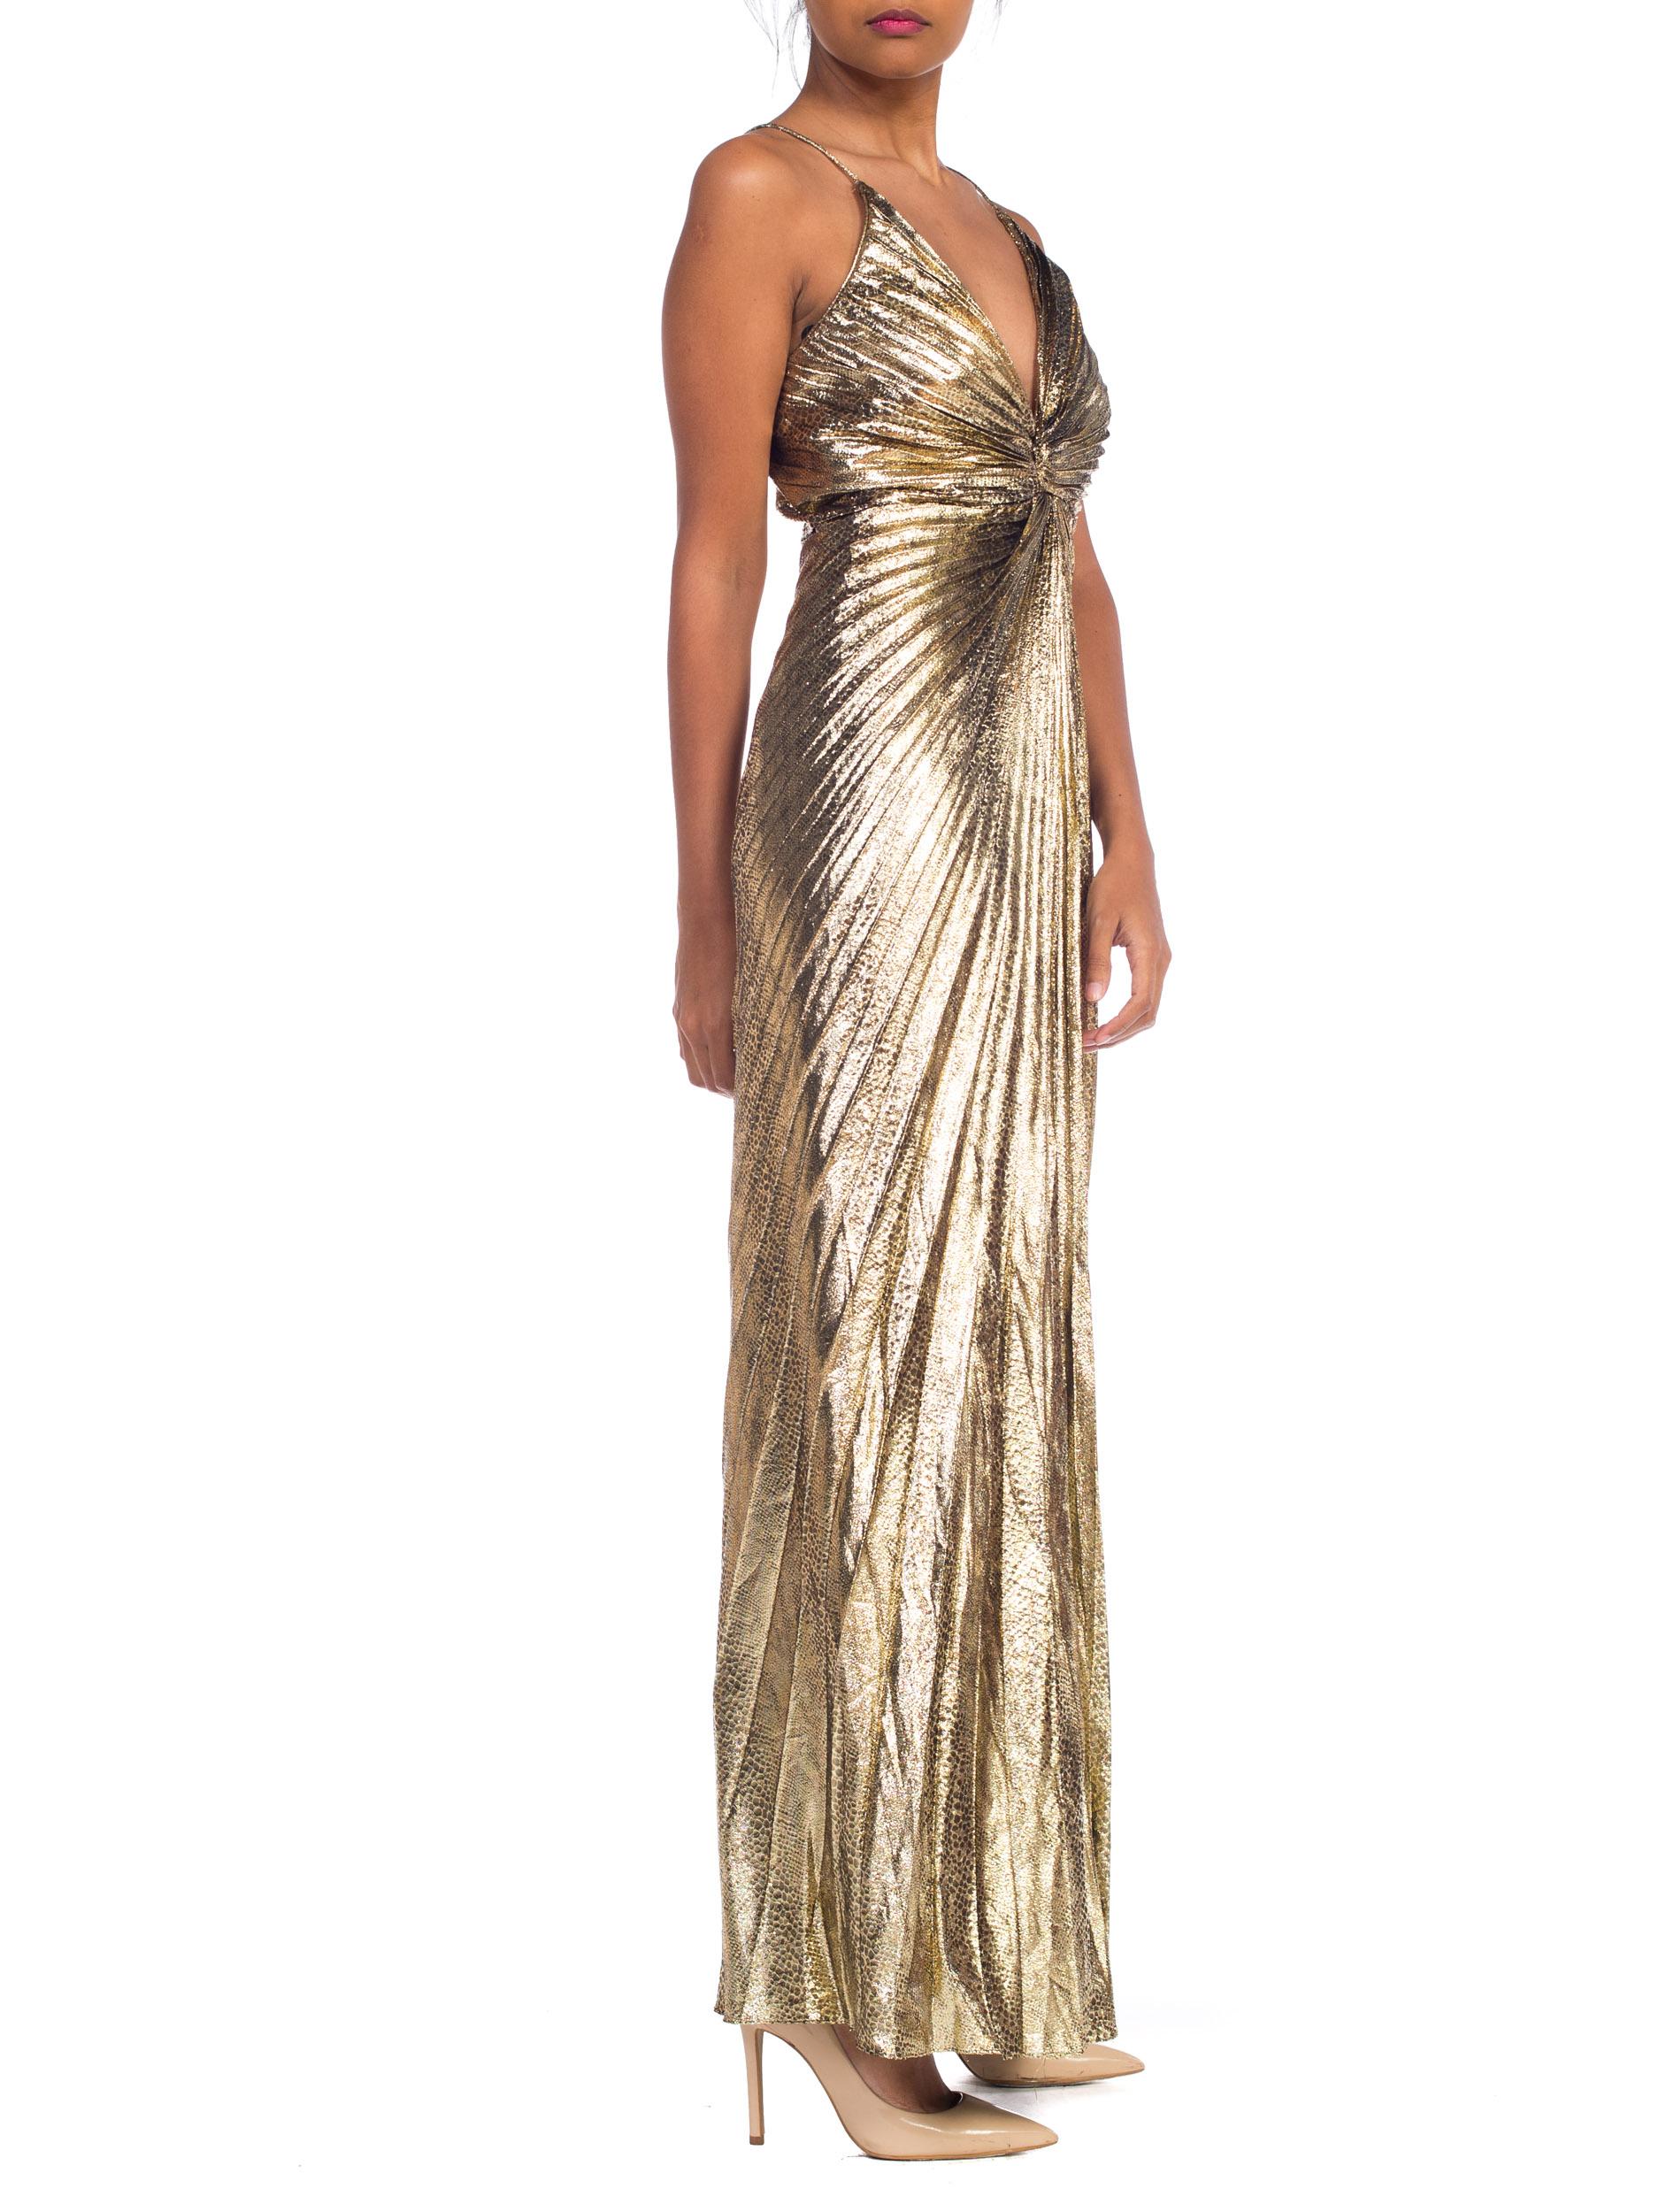 Iconic Travilla Gold Lamé Marilyn Monroe Disco Halter Gown In Good Condition In New York, NY